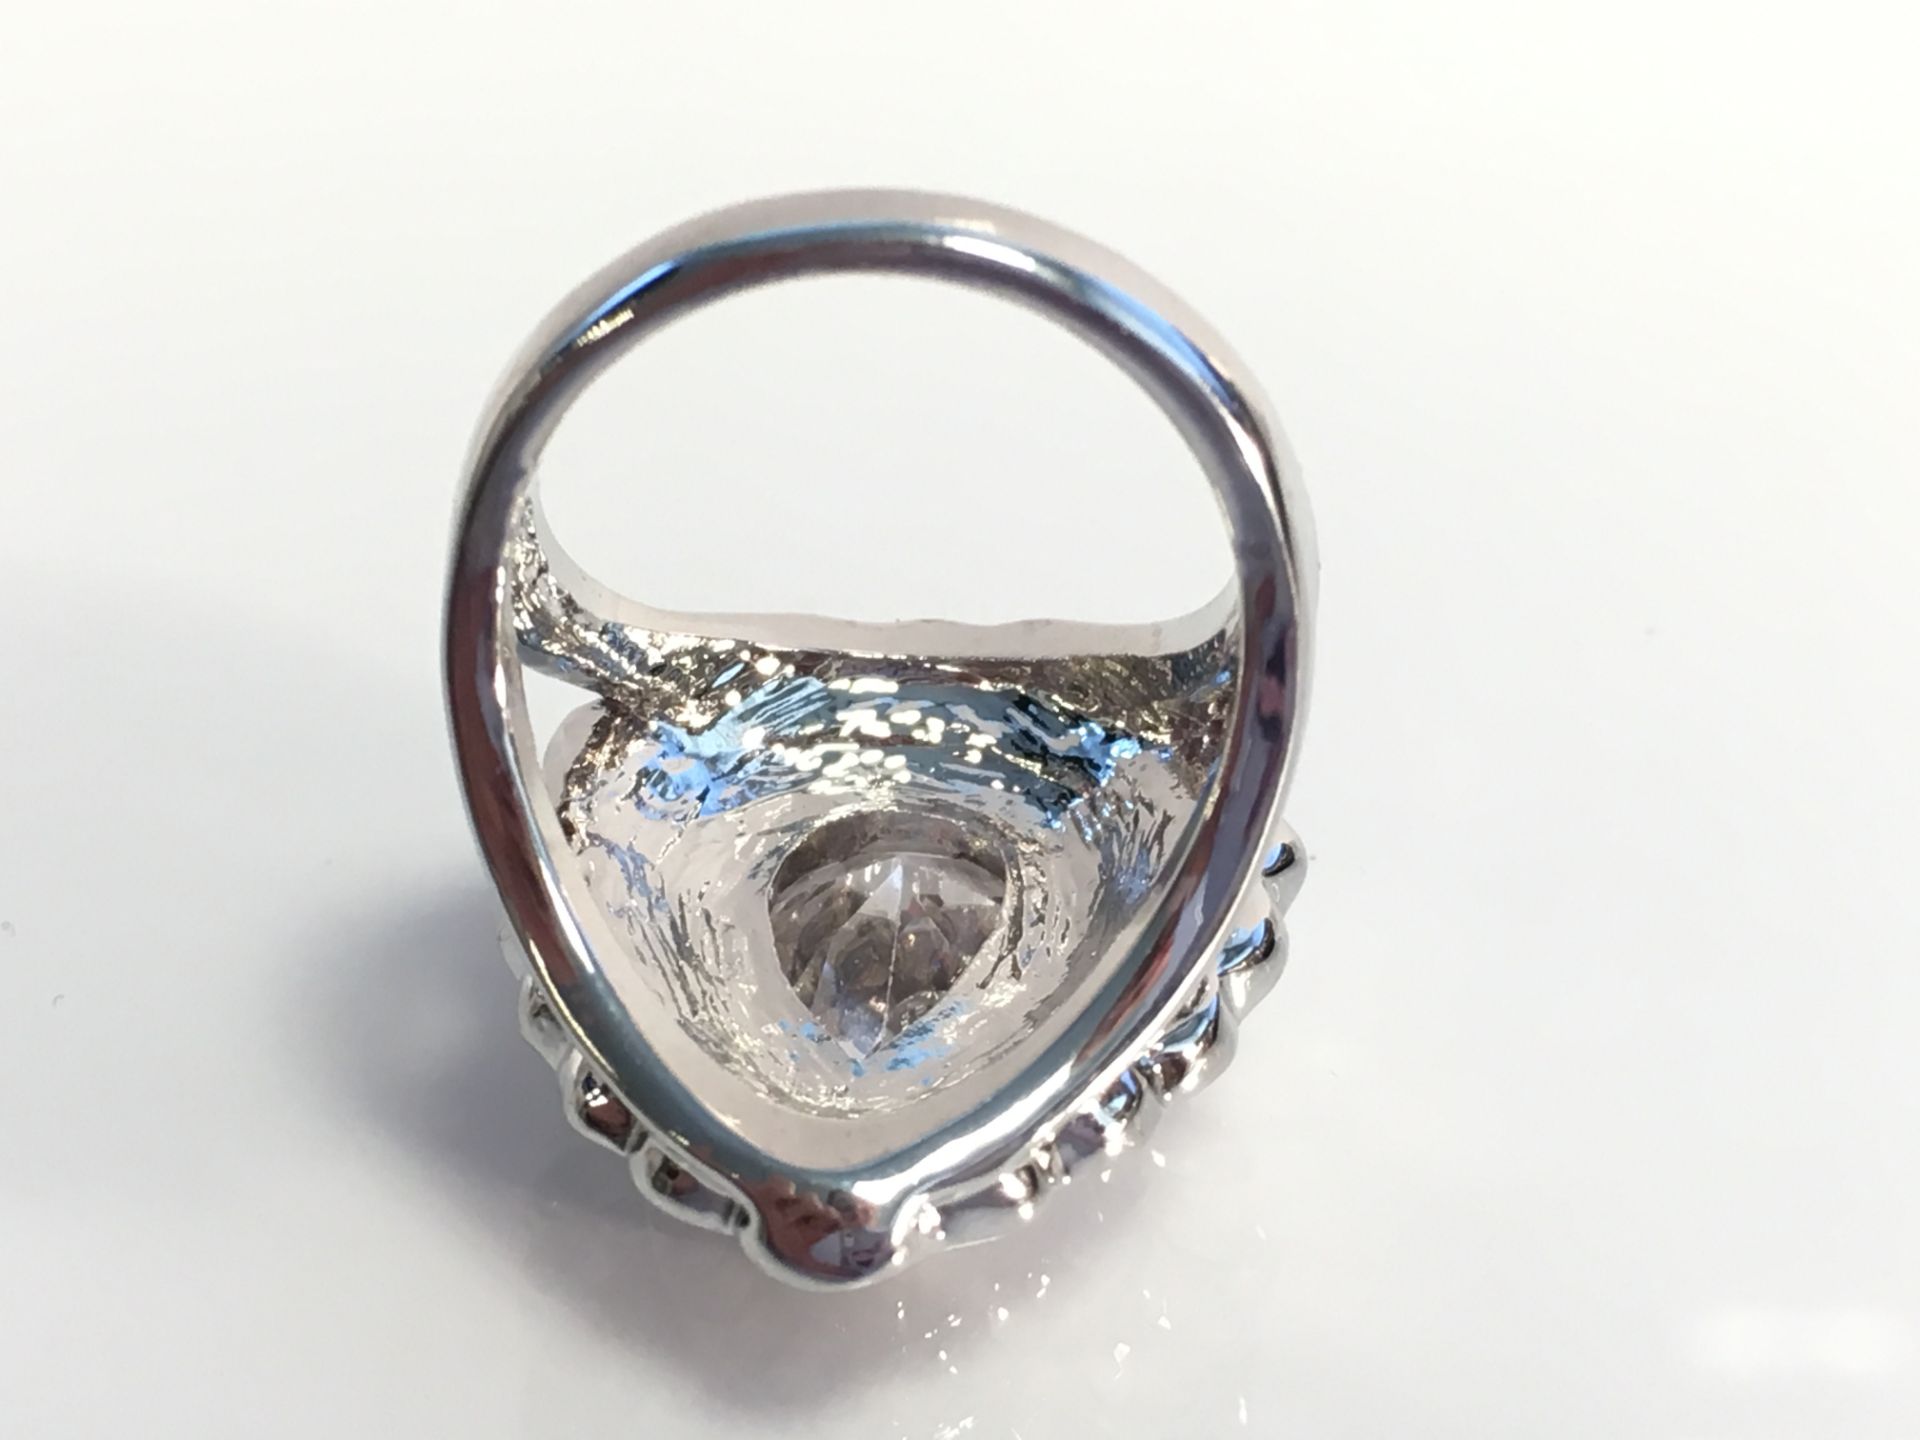 Brand New Pear Shape Simulated Silver Swarovski Elements Cocktail Ring - Image 3 of 3